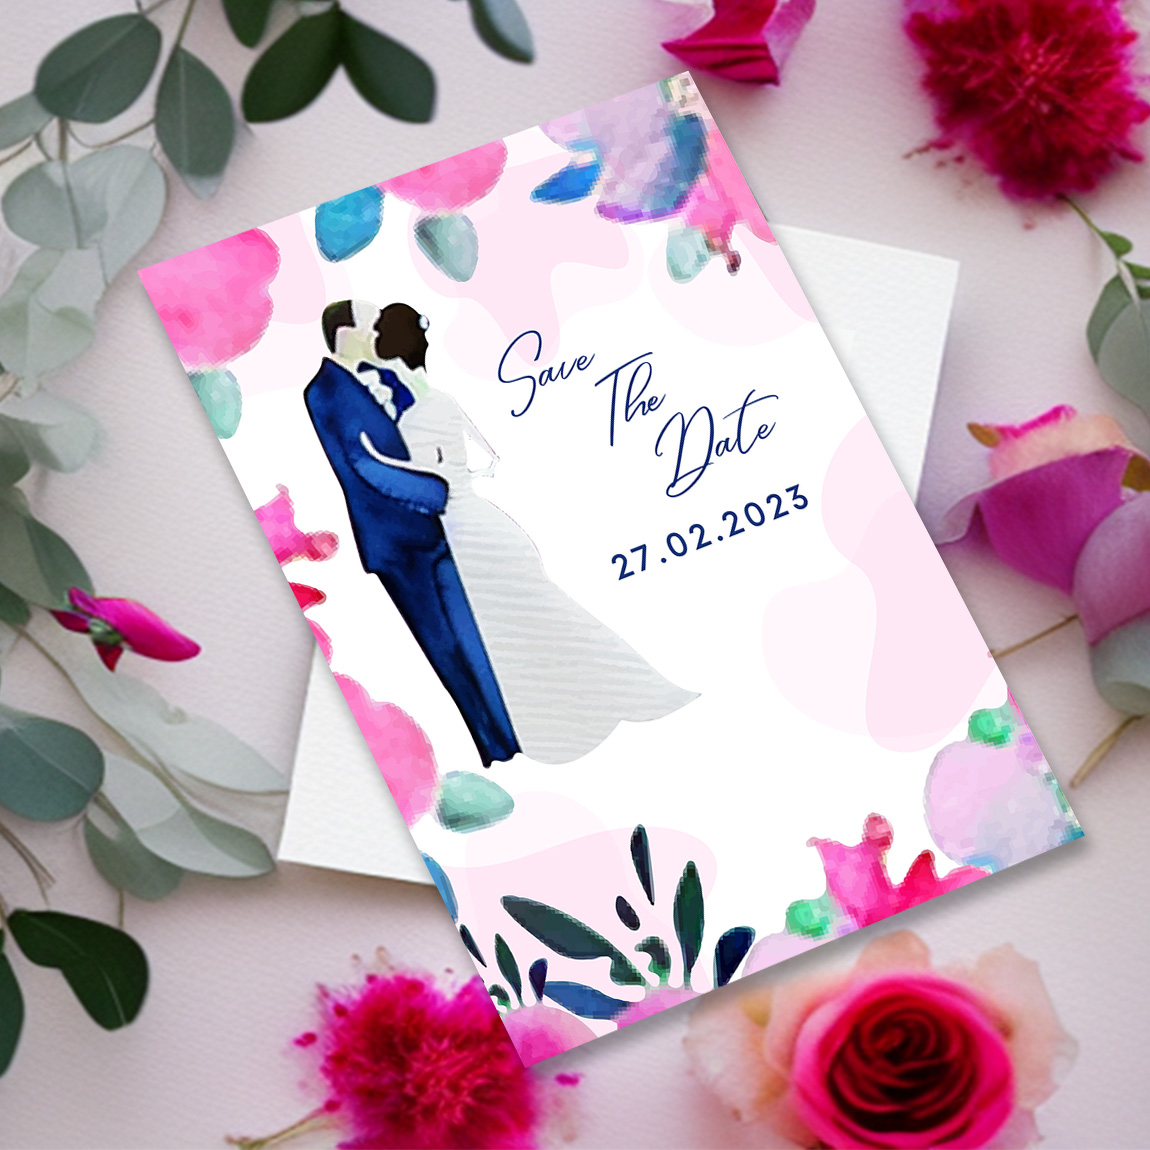 Image with charming wedding invitation card with floral background.